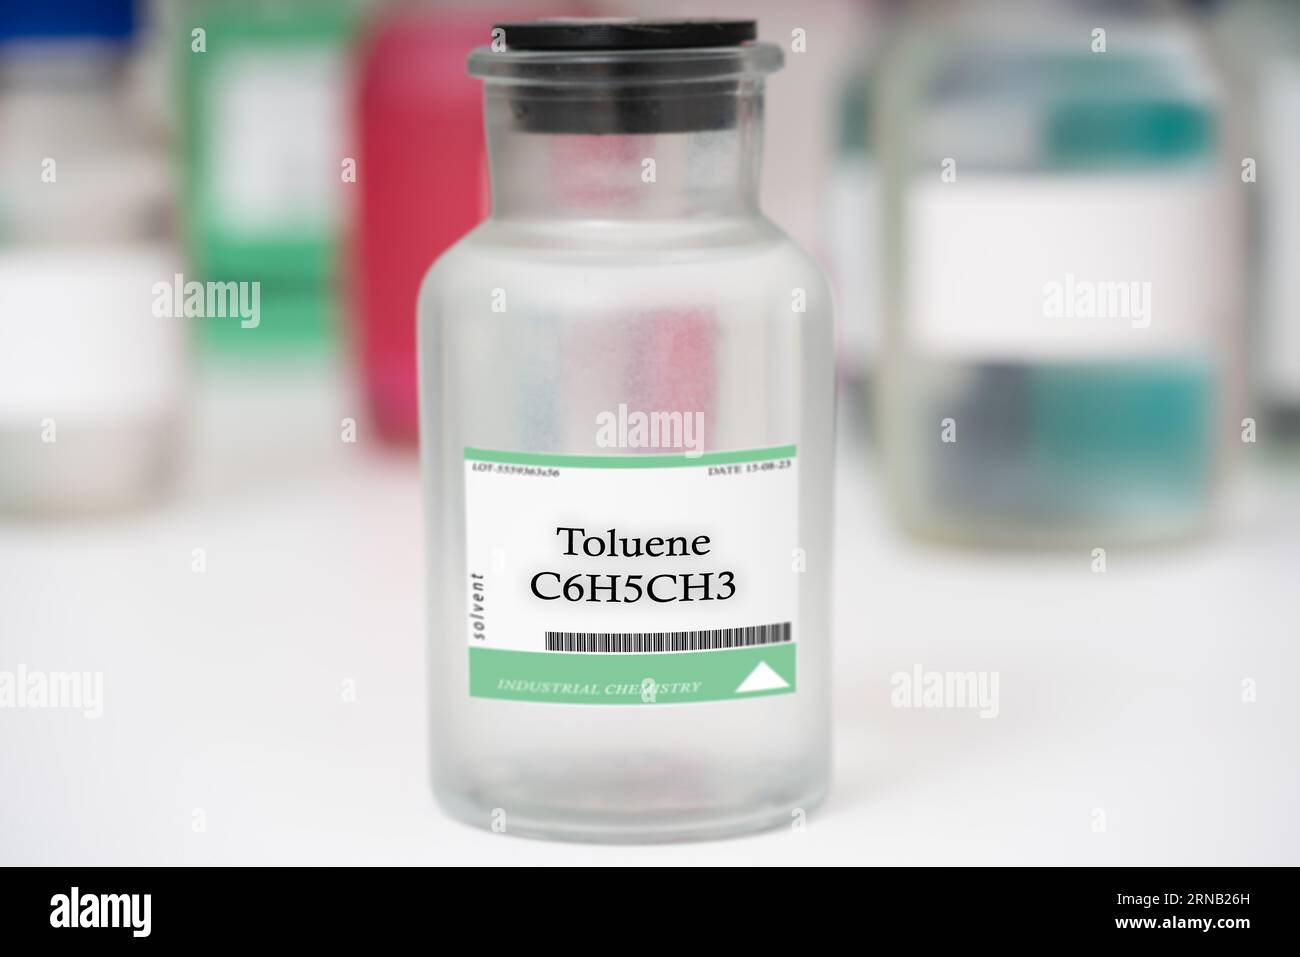 Toluene A colorless, flammable liquid with a sweet odor used as a solvent in the production of various chemicals, such as paints and coatings. Stock Photo